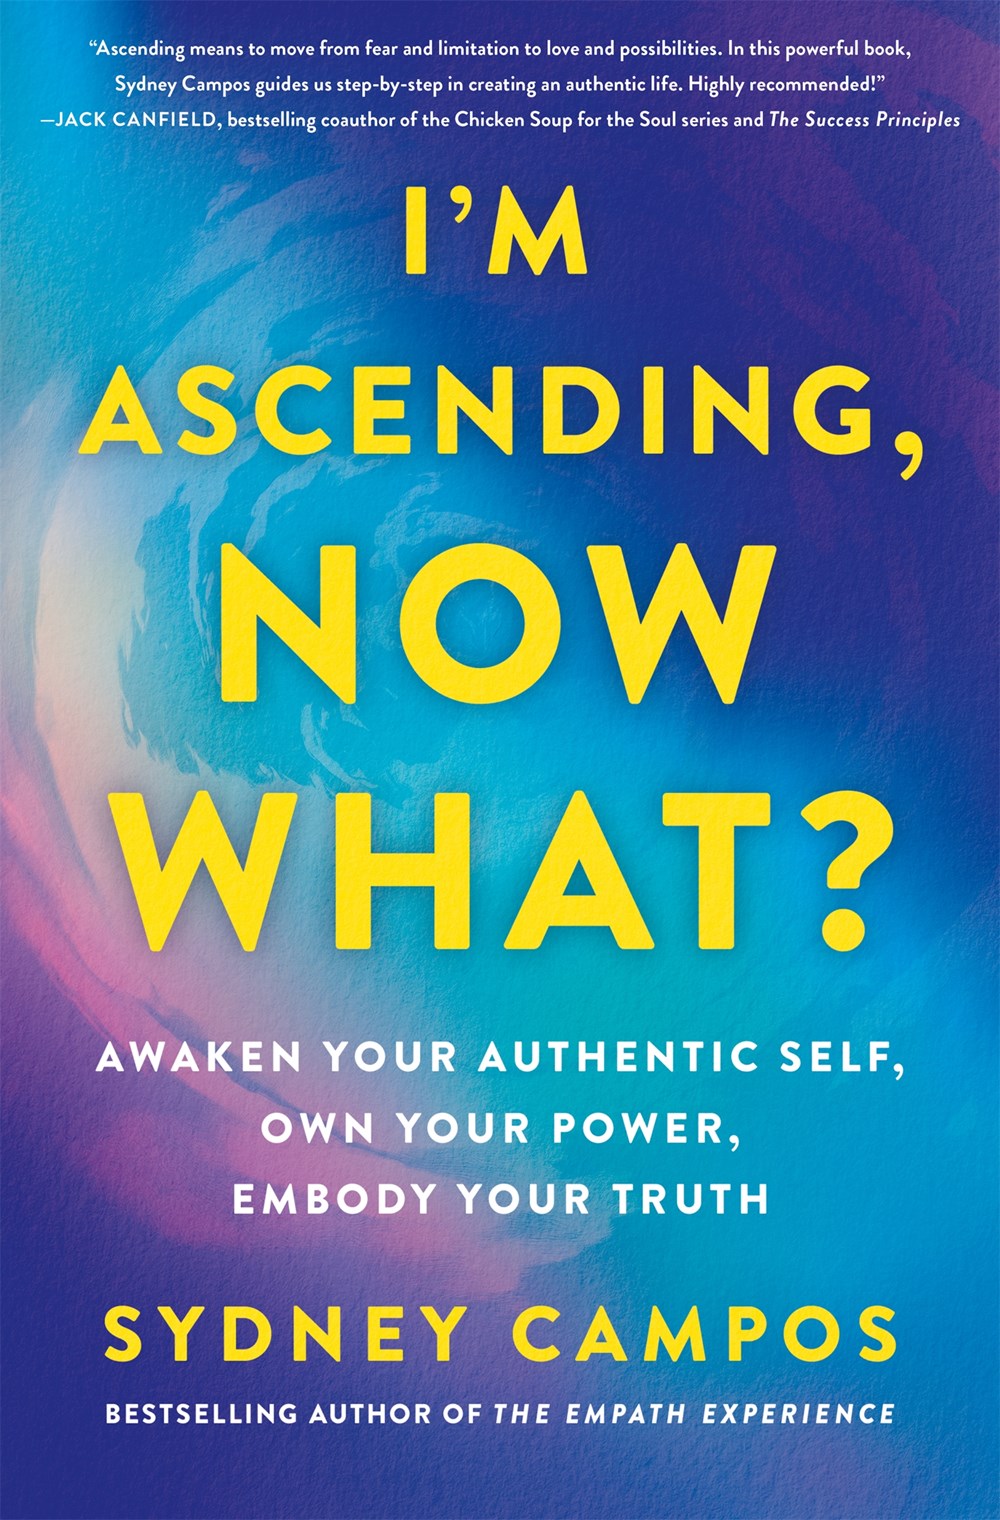 I’m Ascending, Now What? Awaken Your Authentic Self, Own Your Power, Embody Your Truth